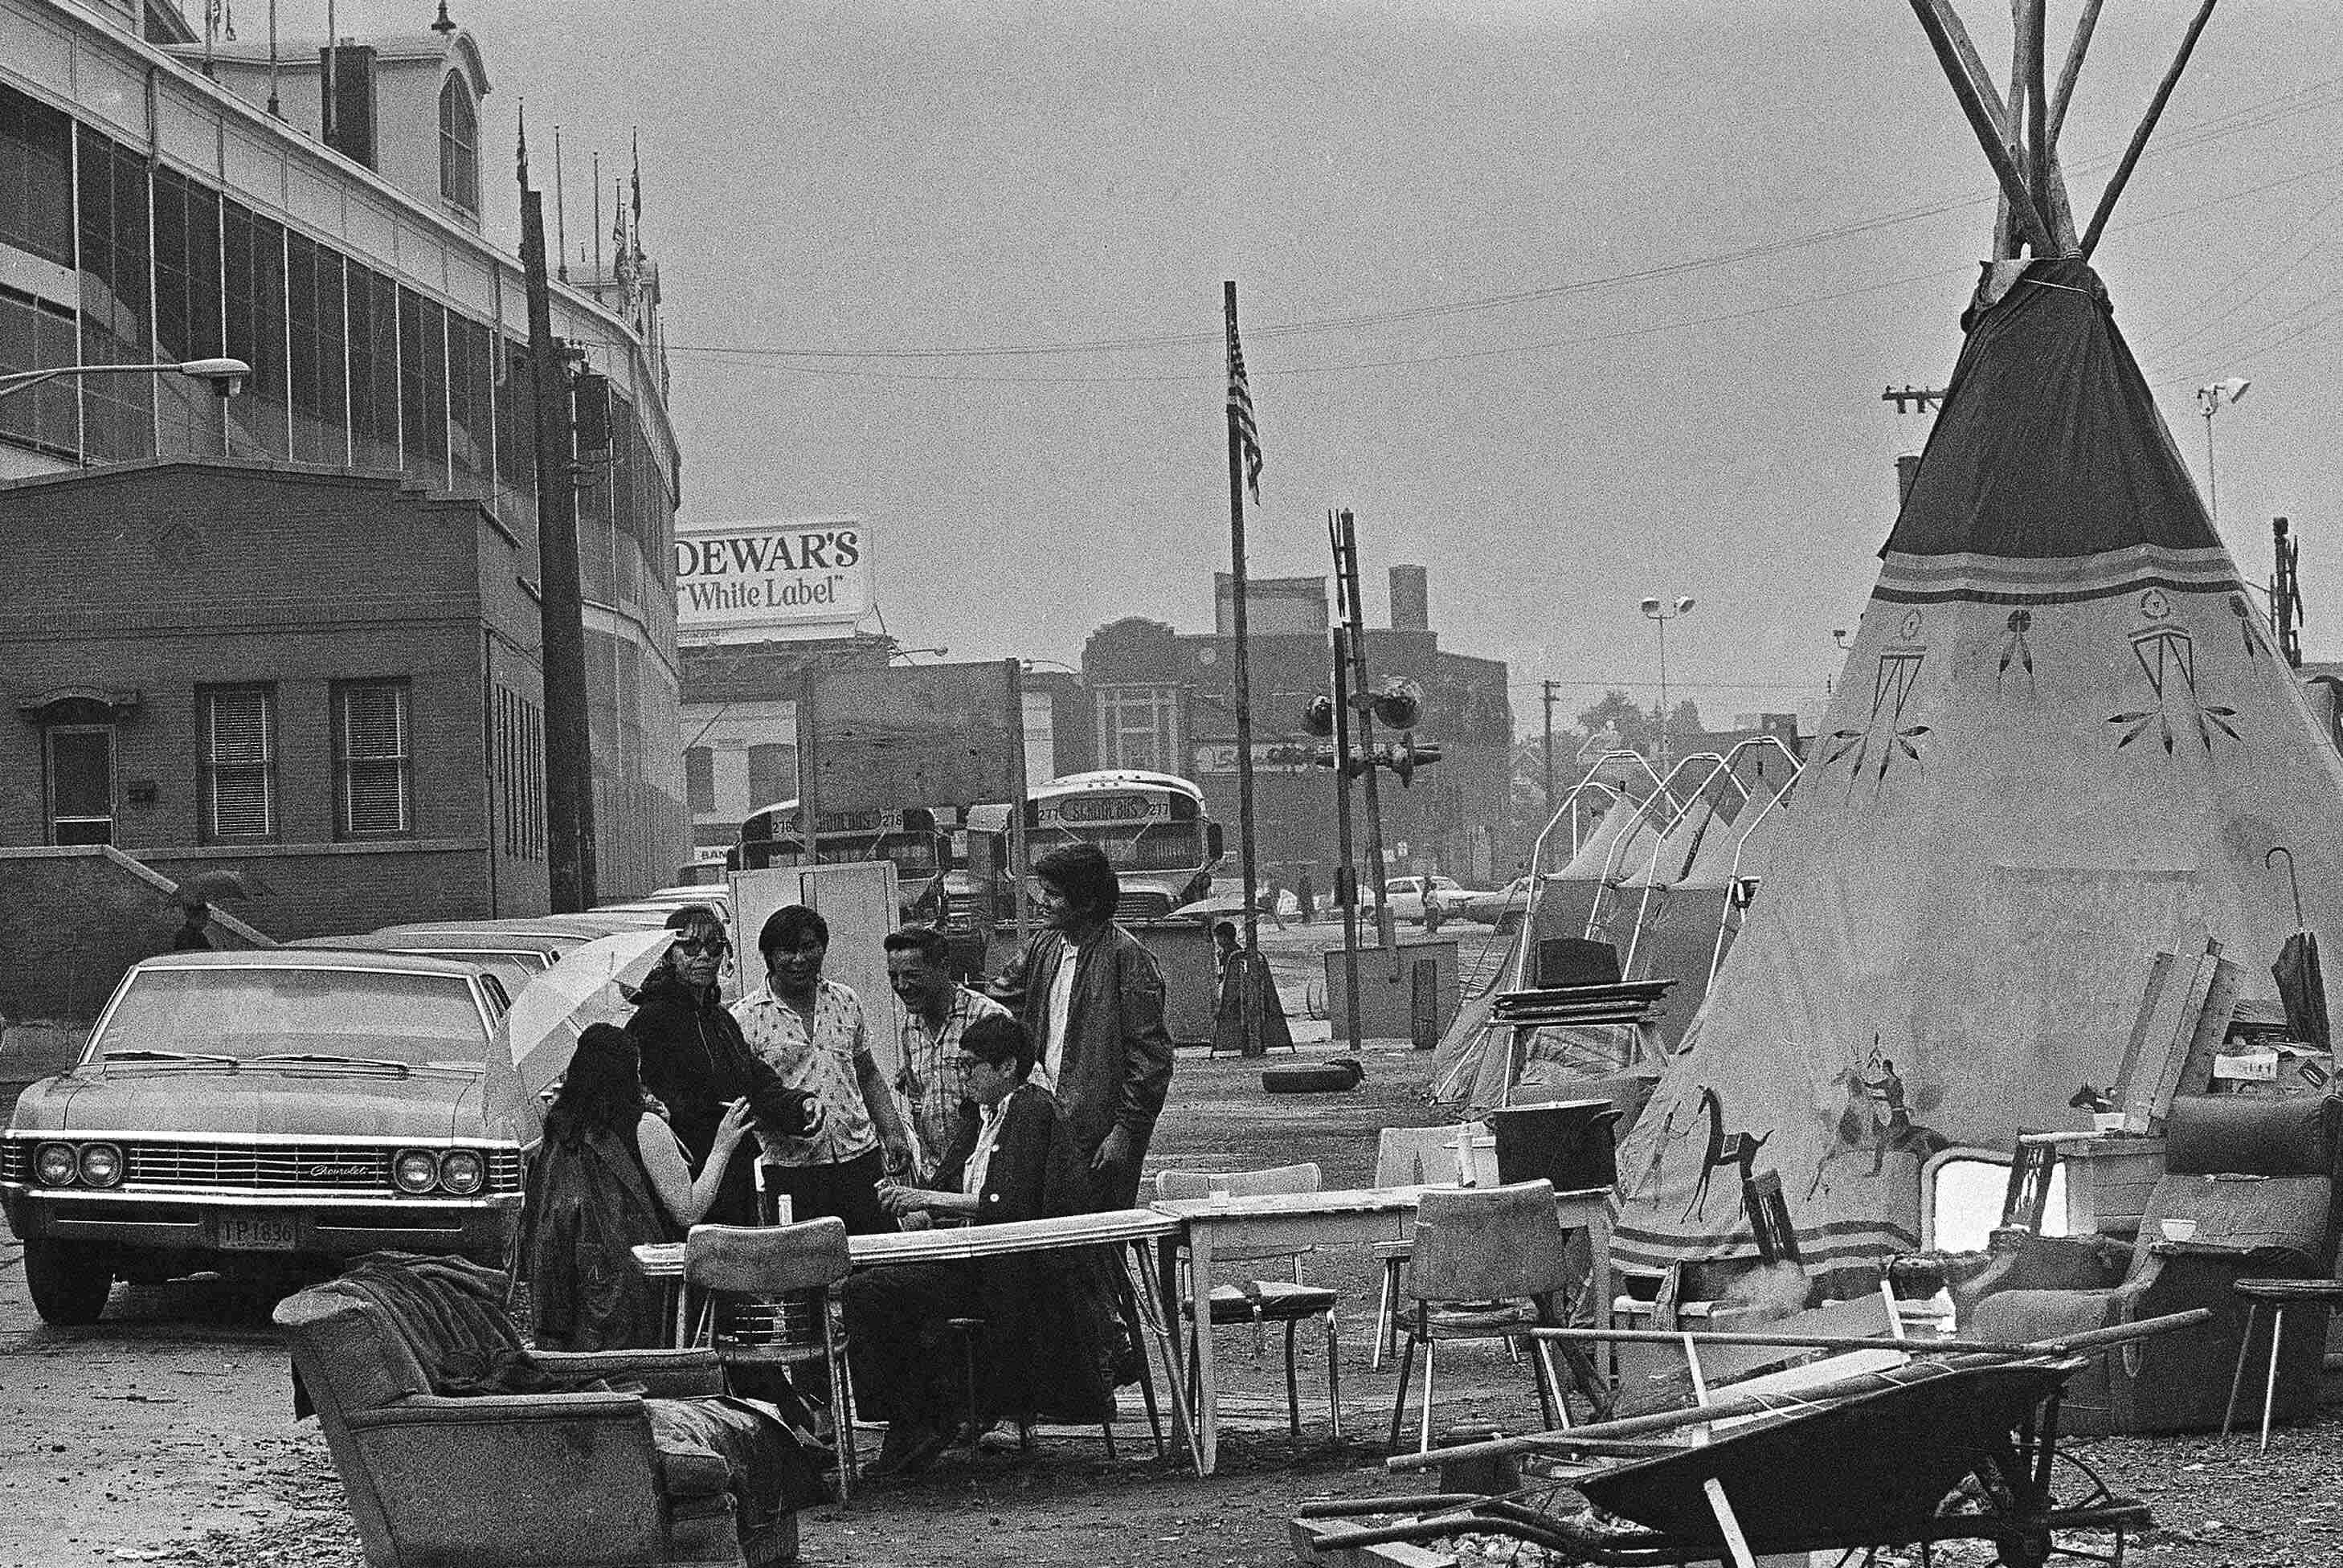 Black and white photograph of a 1970s era Chicago street scene in which two women and four men are gathered around tables and chairs; a large tipi set up near them. Cars and buses are parked nearby. An advertisement from 'Dewar’s White label' is visible on the top of a building in the distance.